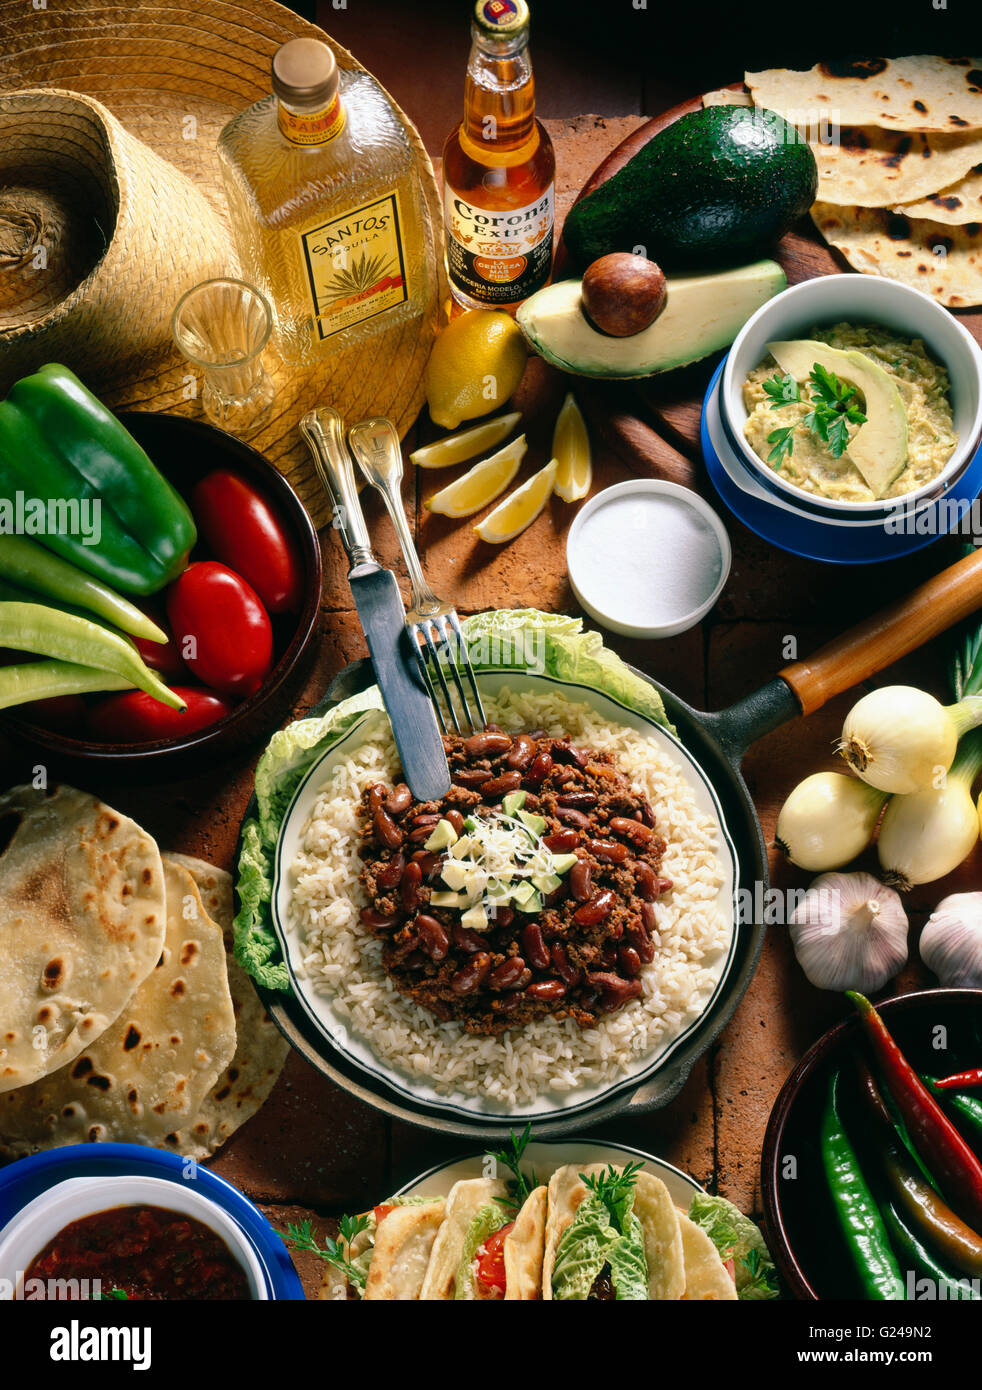 Mexican national cuisine, quesadillas, stuffed tortillas, guacamole, chili con carne with rice, tequila, Corona beer Stock Photo